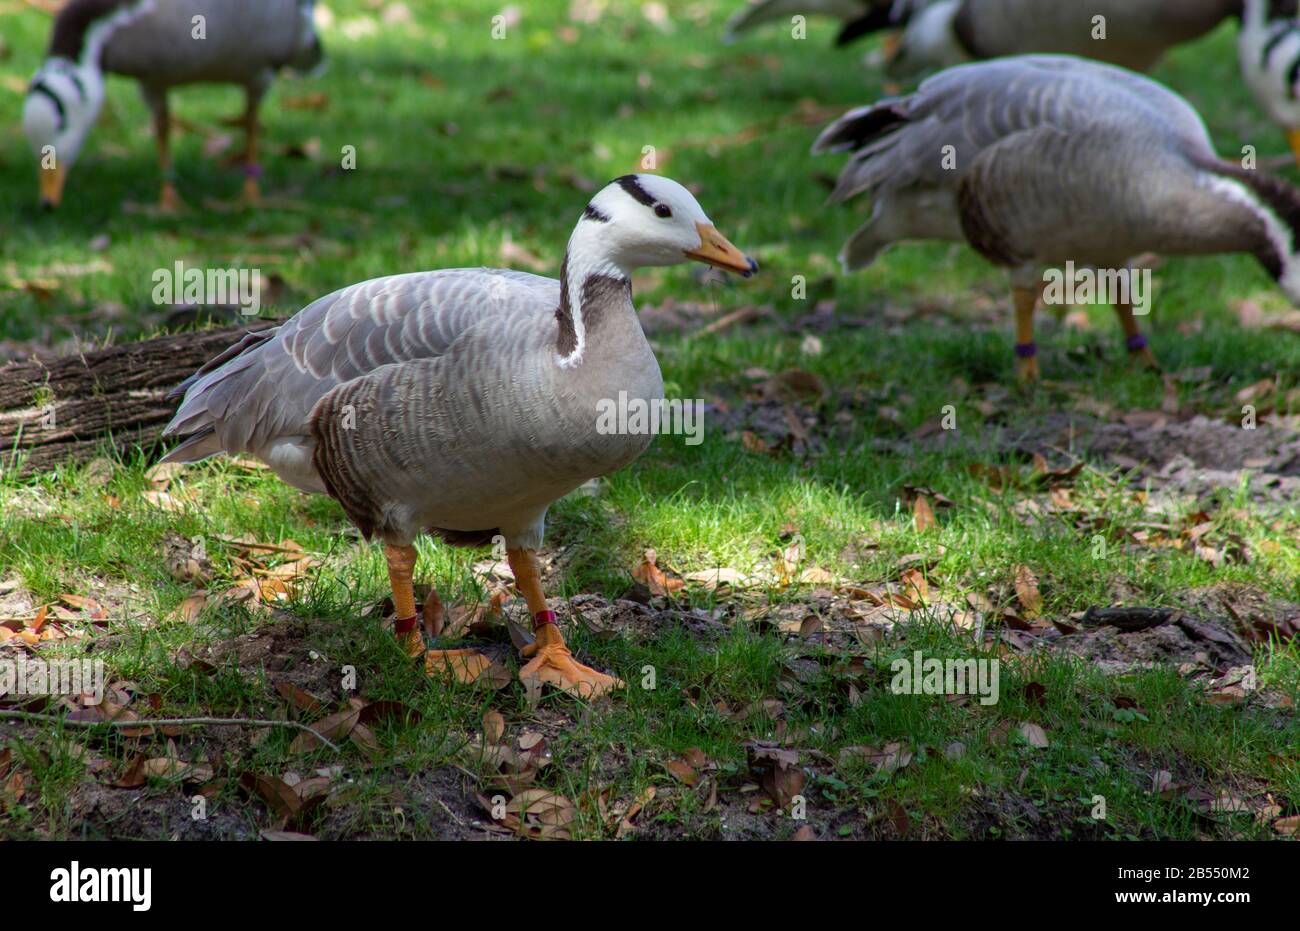 Anser Indicus, an asian goose with black bars on its head found at disney's animal kingdom Stock Photo